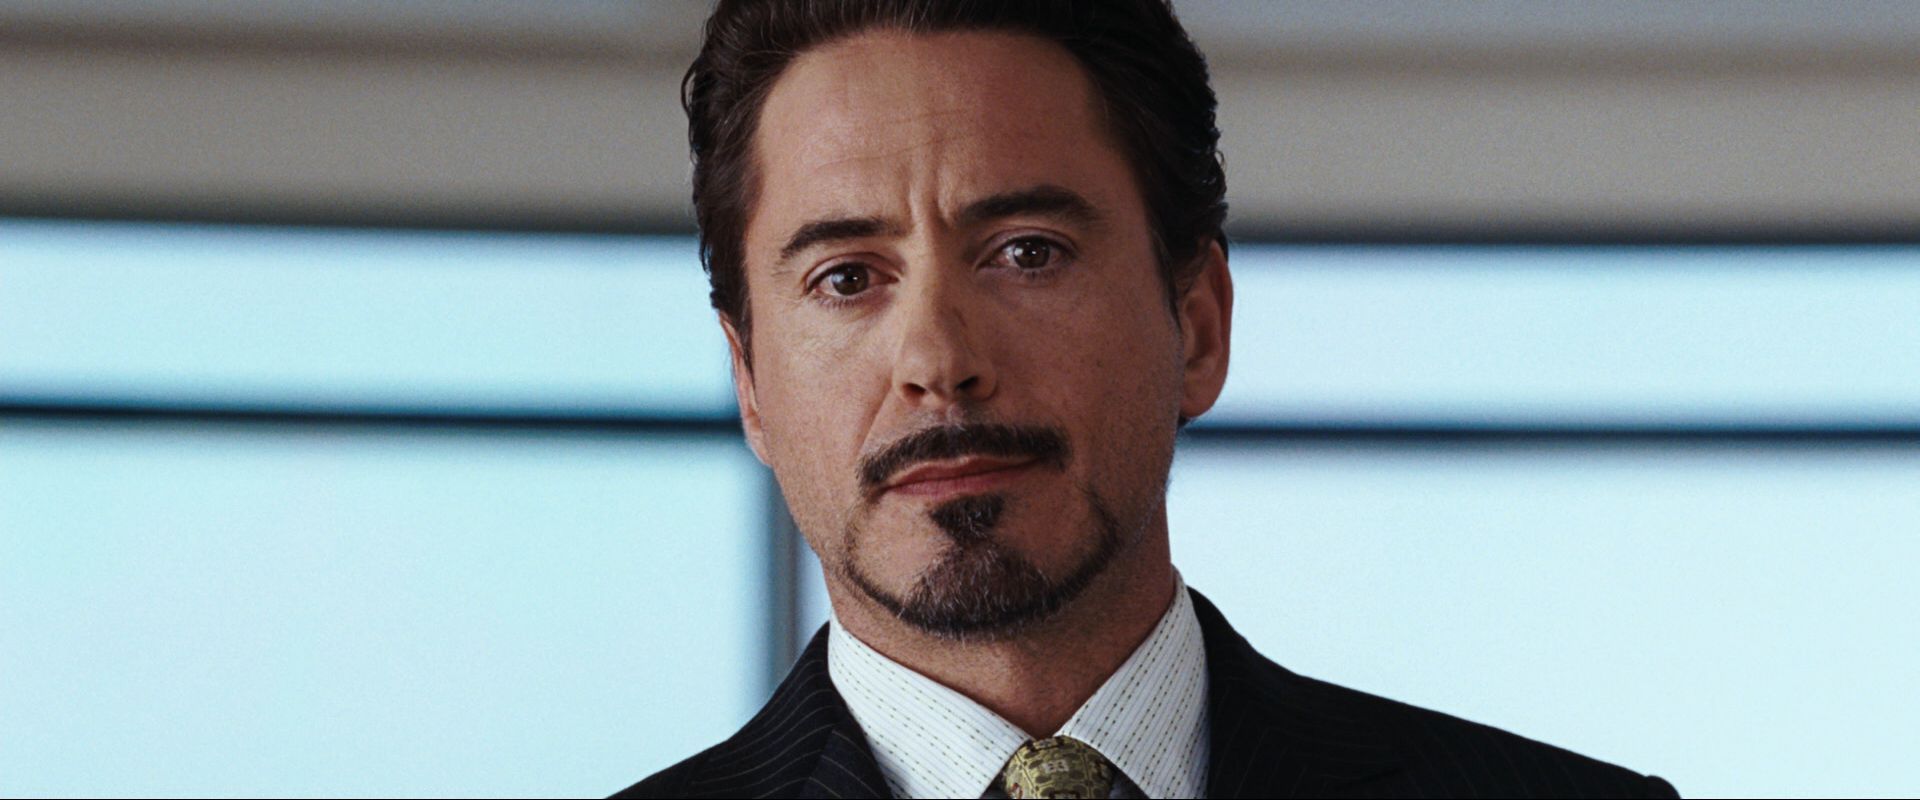 Robert Downey Jr improvised one of Iron Man's most iconic lines